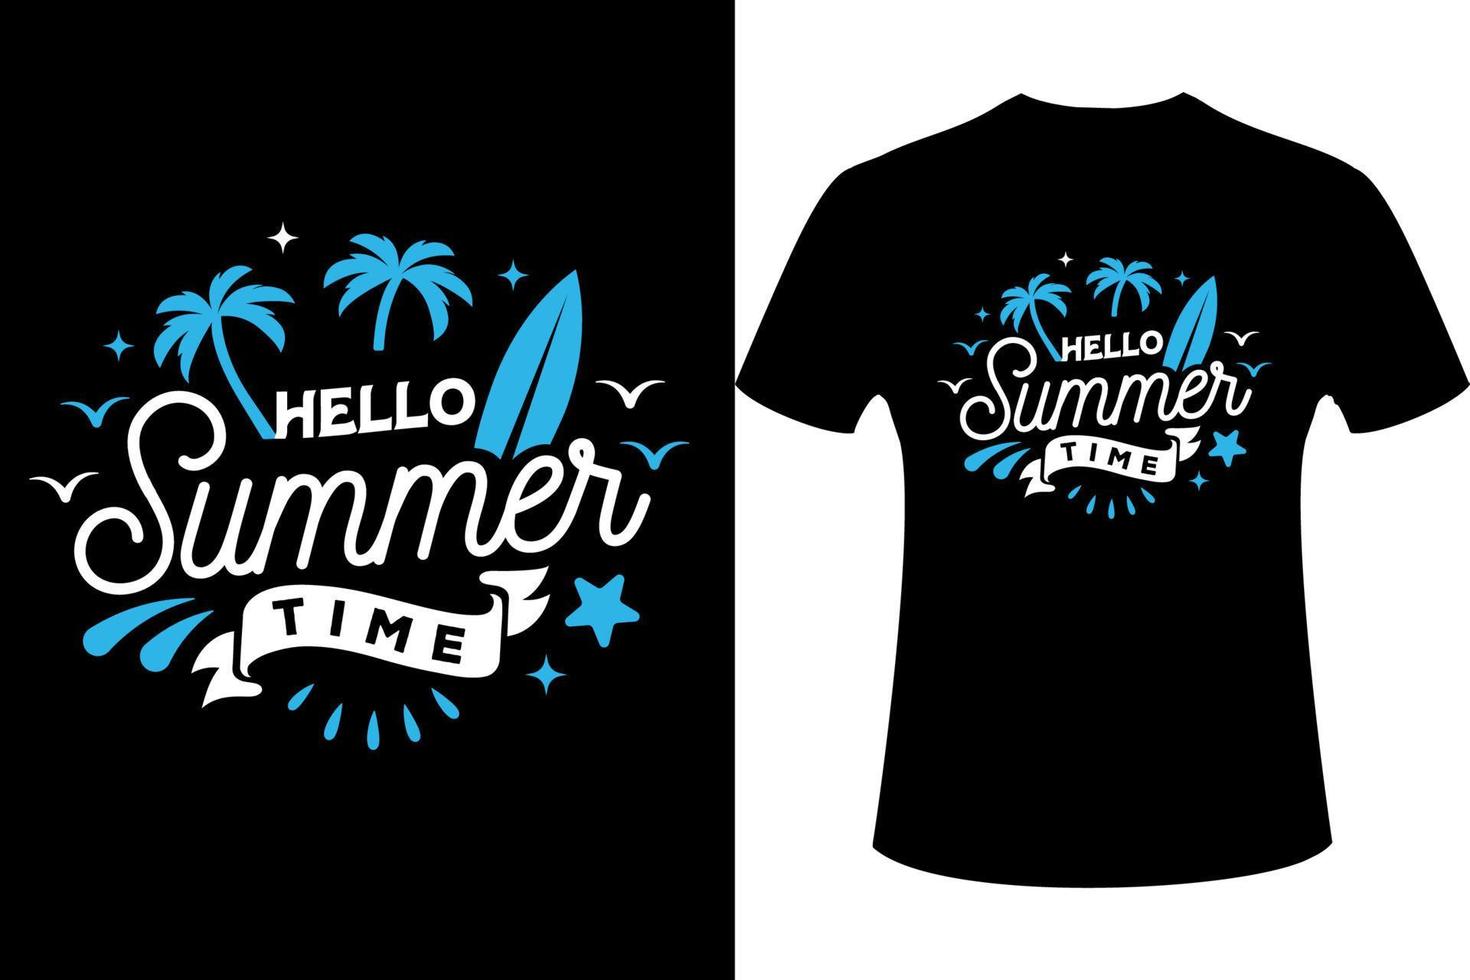 Hello Summer Time t-shirt design with palm trees silhouettes, typography, print, vector illustration. Global swatches.